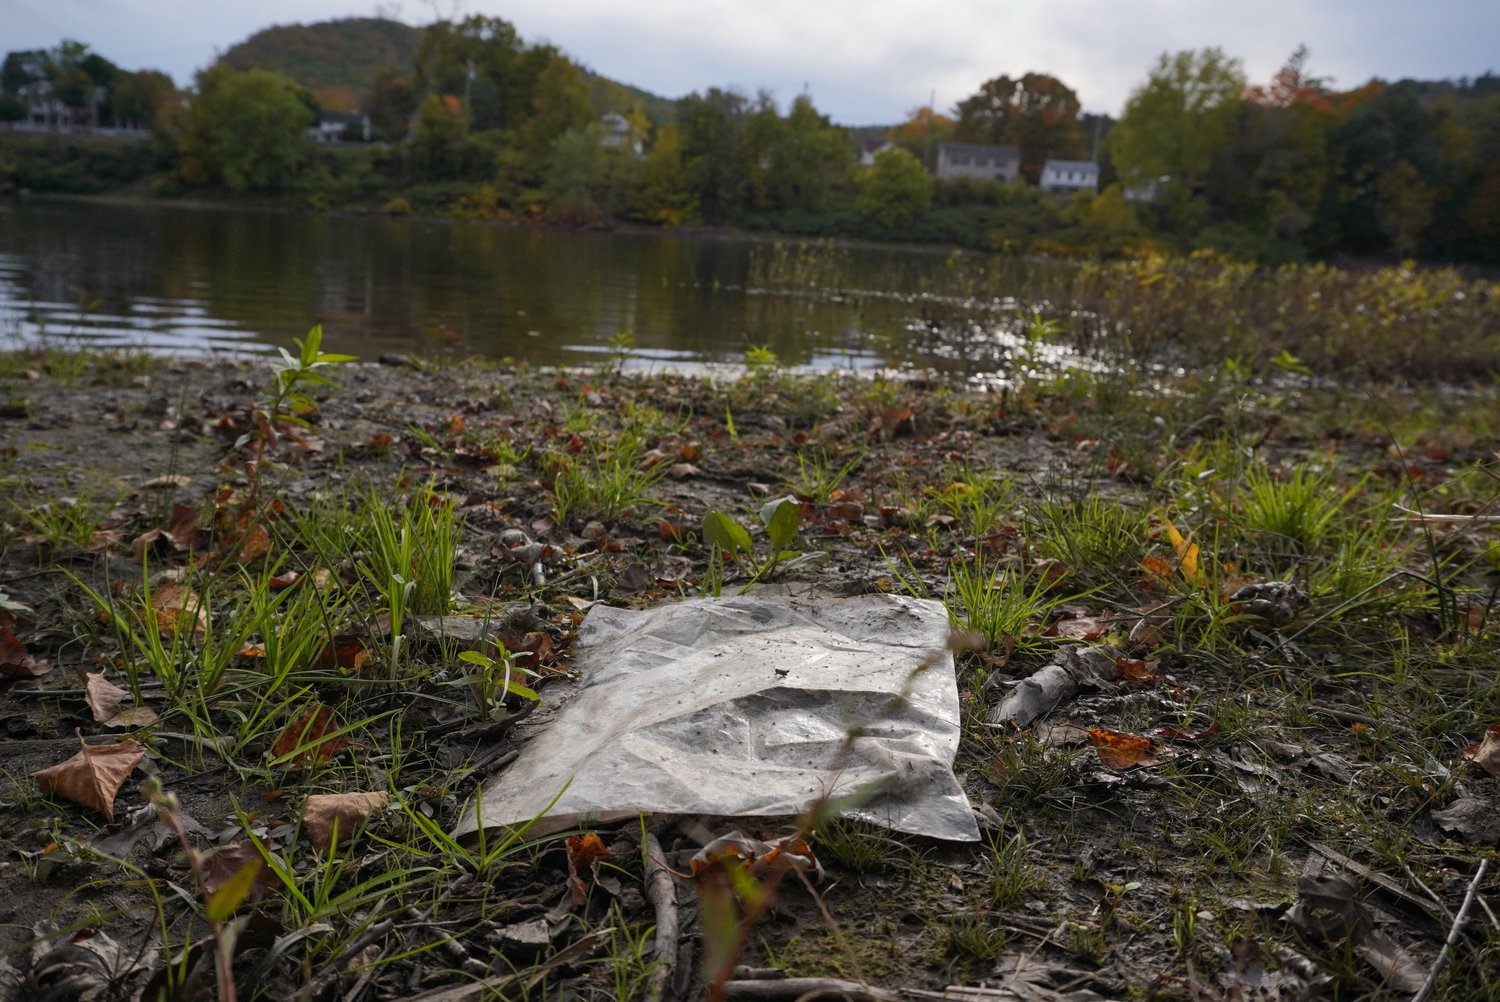 A plastic bag sits along the bank of the Delaware River. This type of plastic, made from low-density polyethylene, is one of the more difficult—if not impossible—types of plastic to recycle. Only 10 percent of four million tons of plastic bags, sacks and wraps were recycled in 2018.